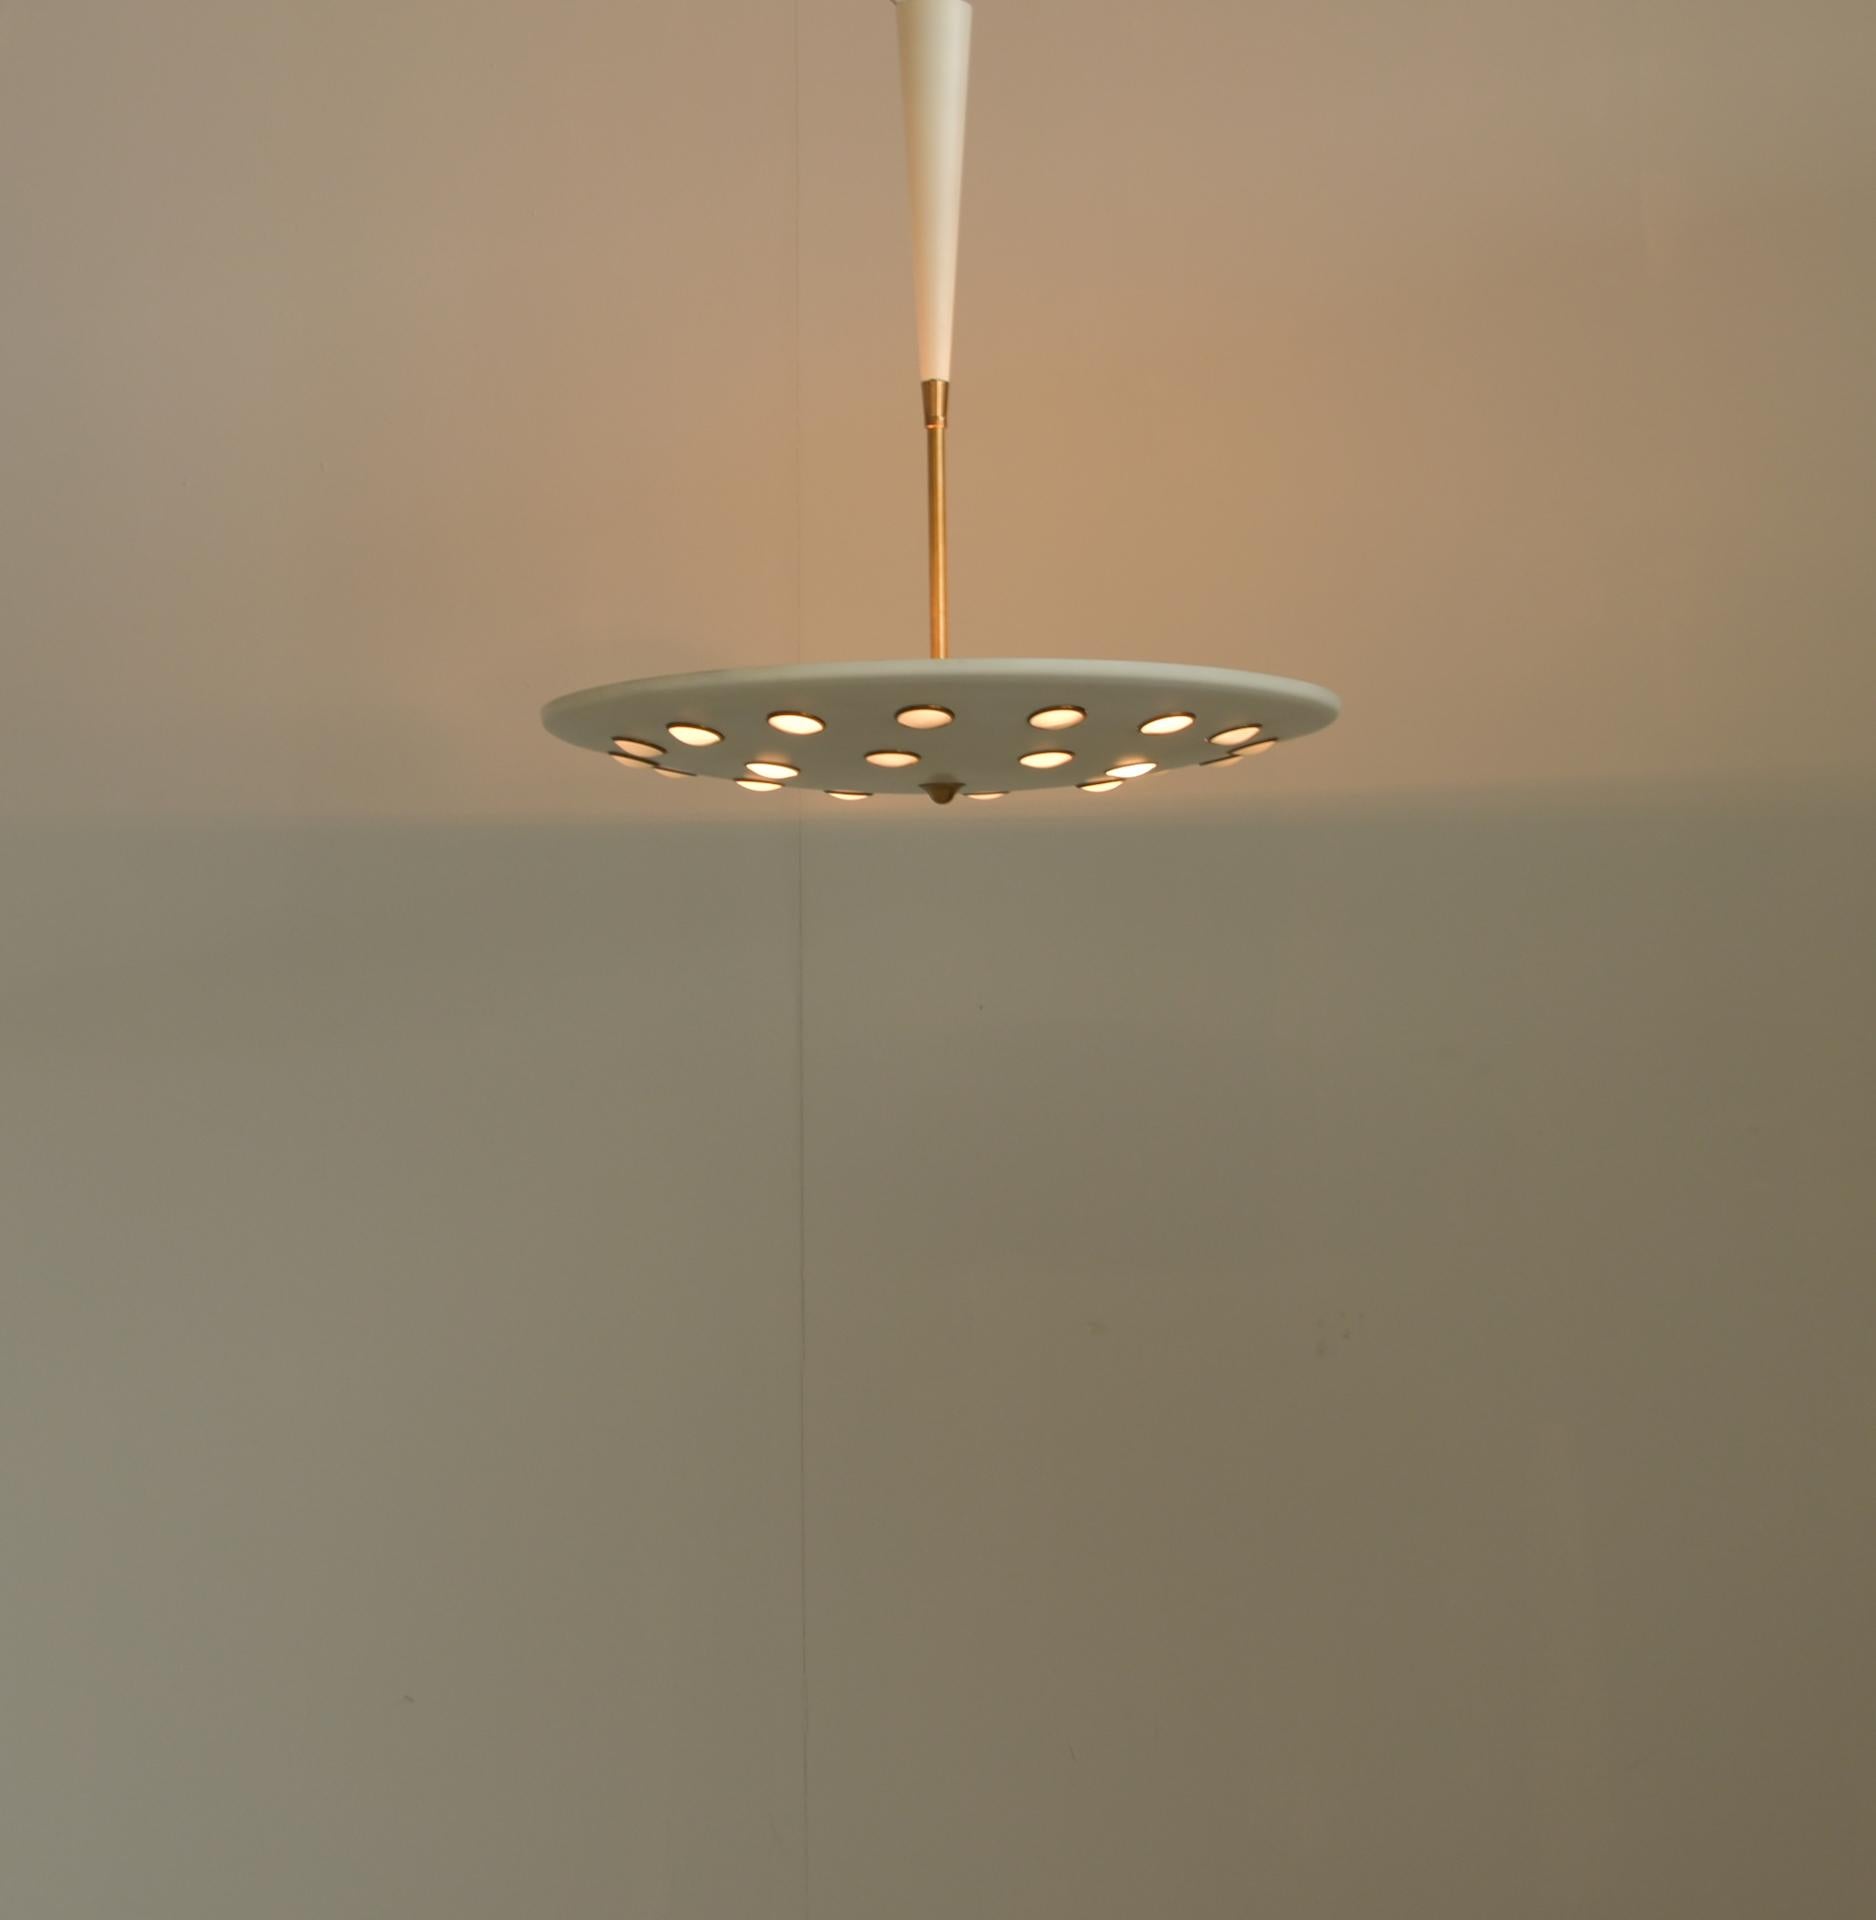 Lumen Milano midcentury Italian pendant lamp, circa 1950. Lacquered metal pendant light with a suspended dish indented with inserted brass circles and semi opaque glass lenses.